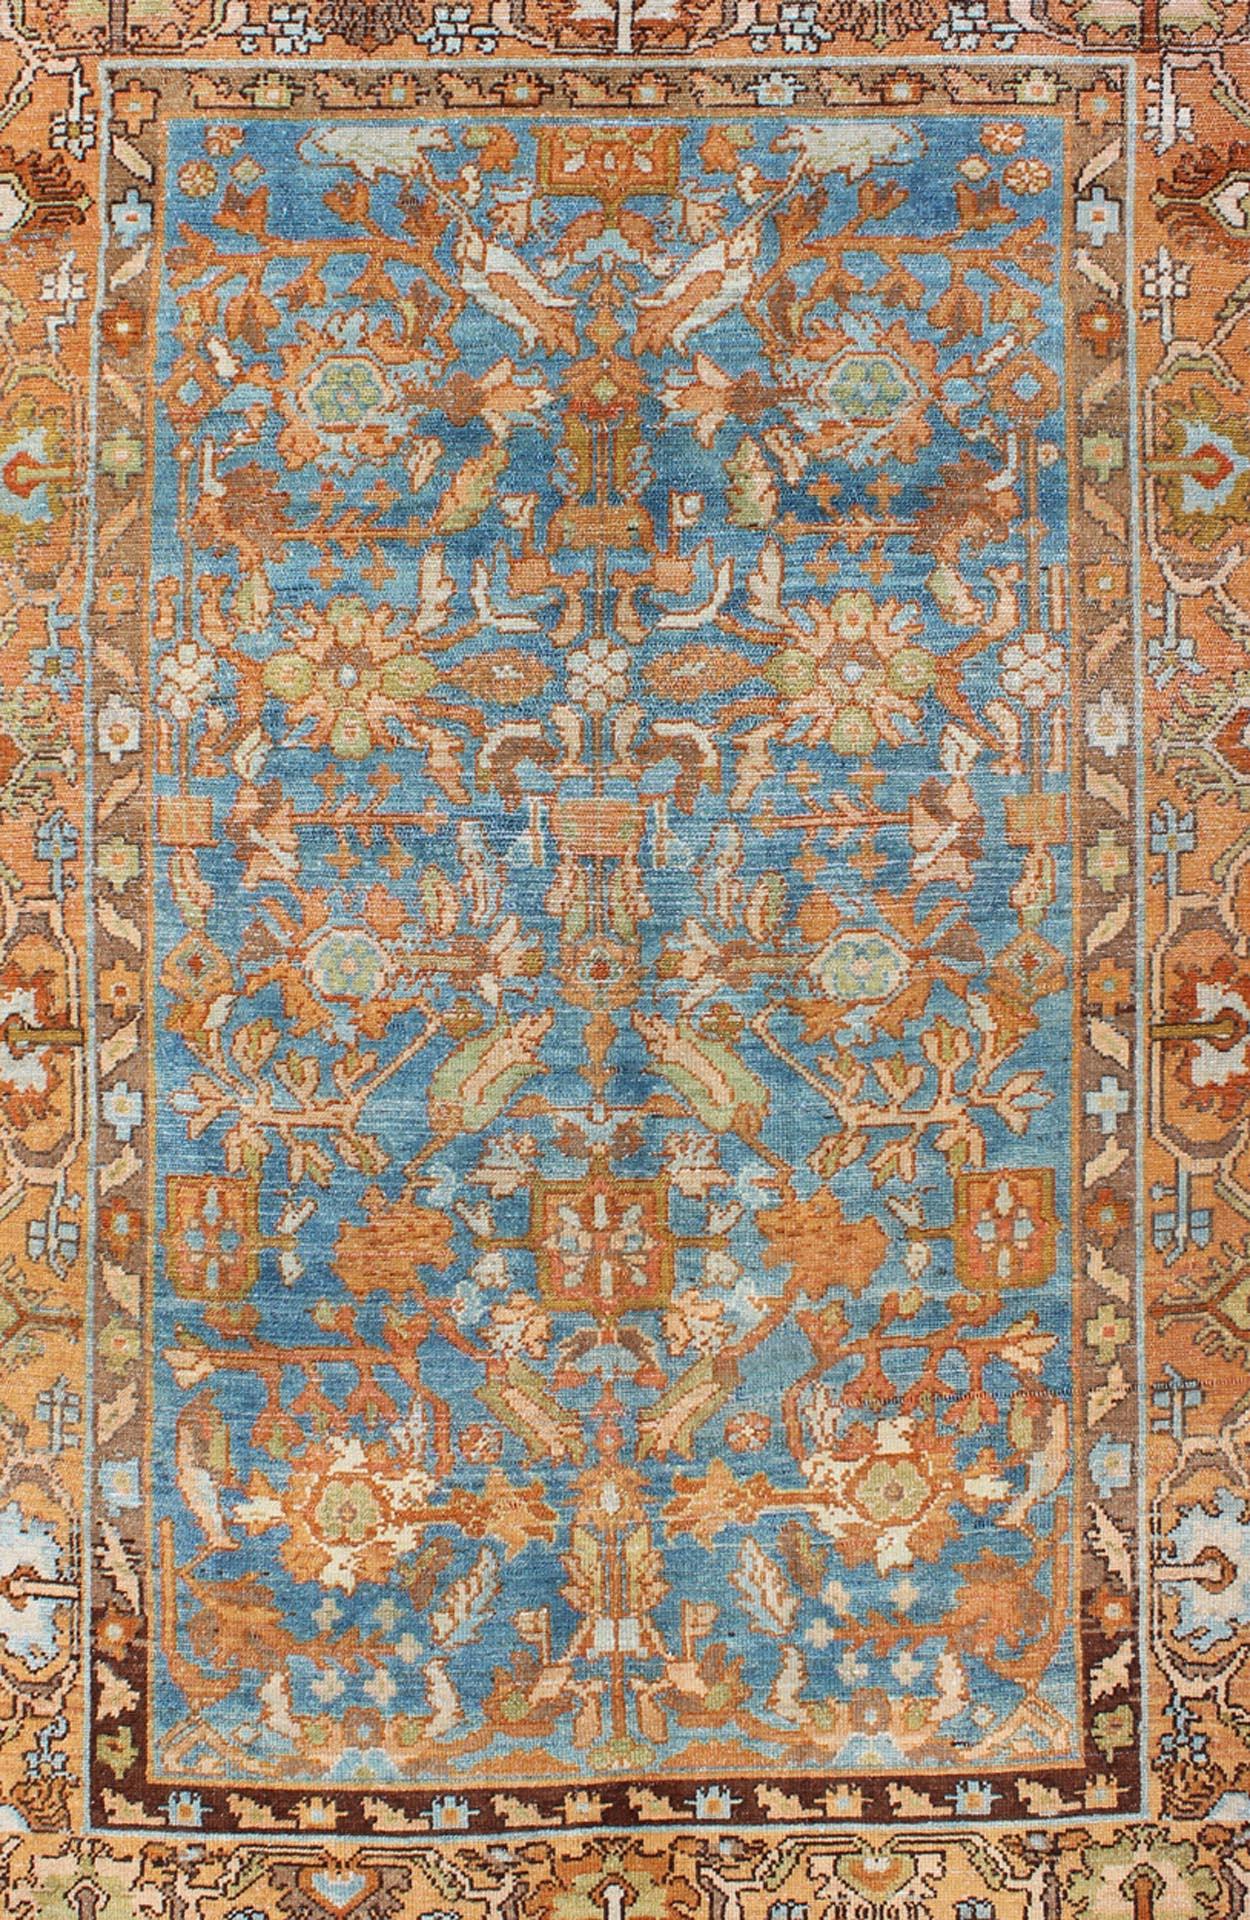 Hand-Knotted Vibrant Antique Persian Malayer Rug in Shades of Rust, Orange, and Blue For Sale